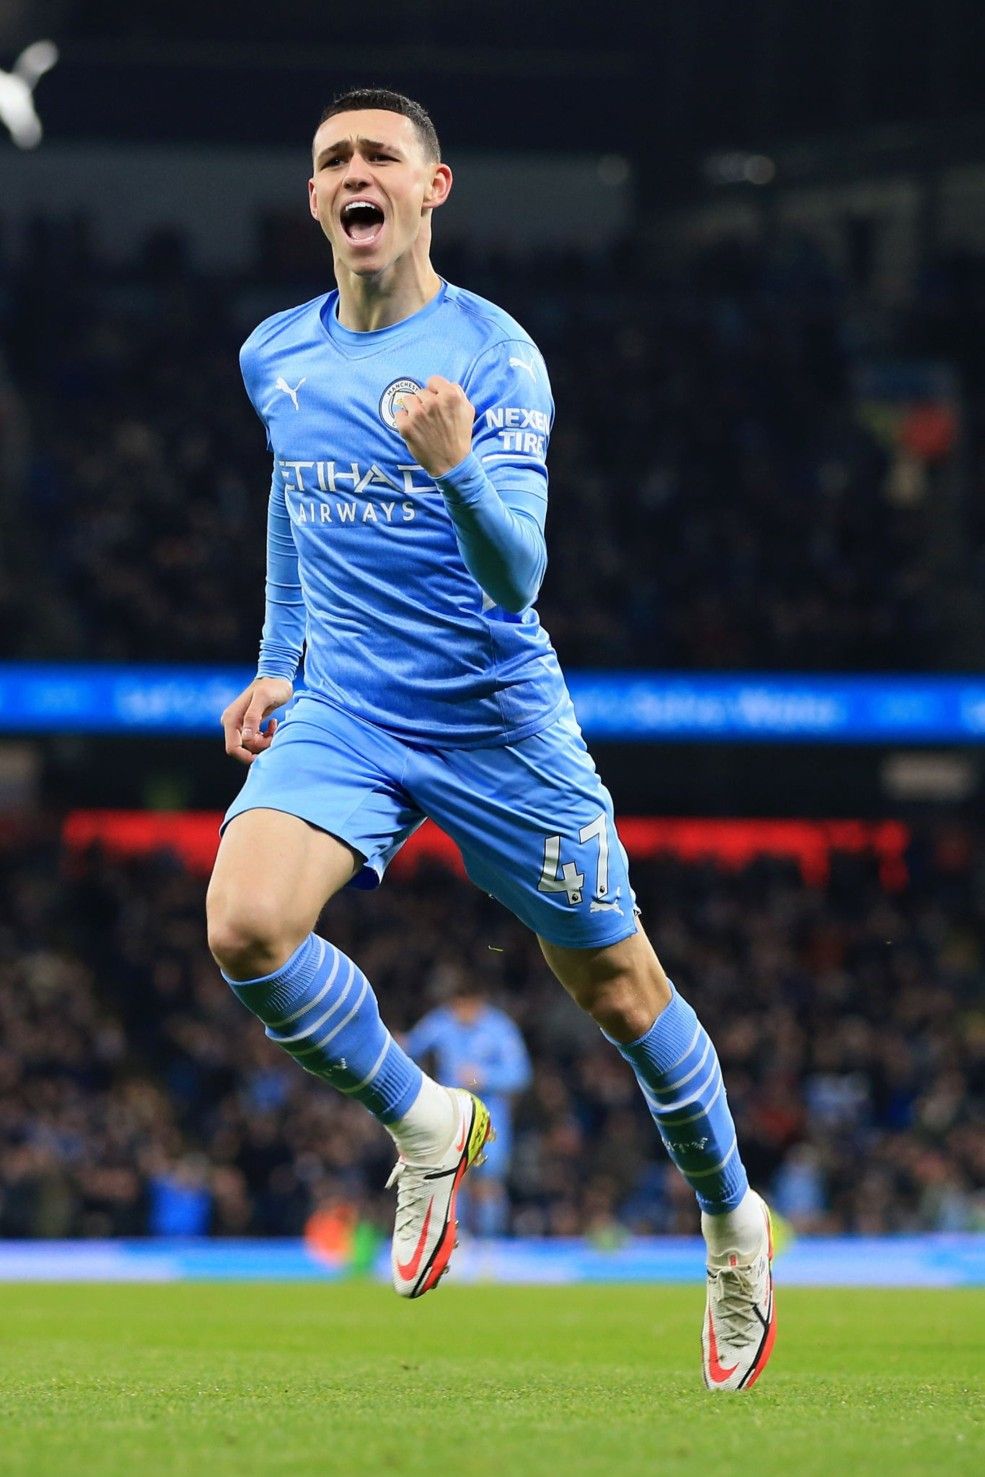 Phil Foden ideas. phil, manchester city, football